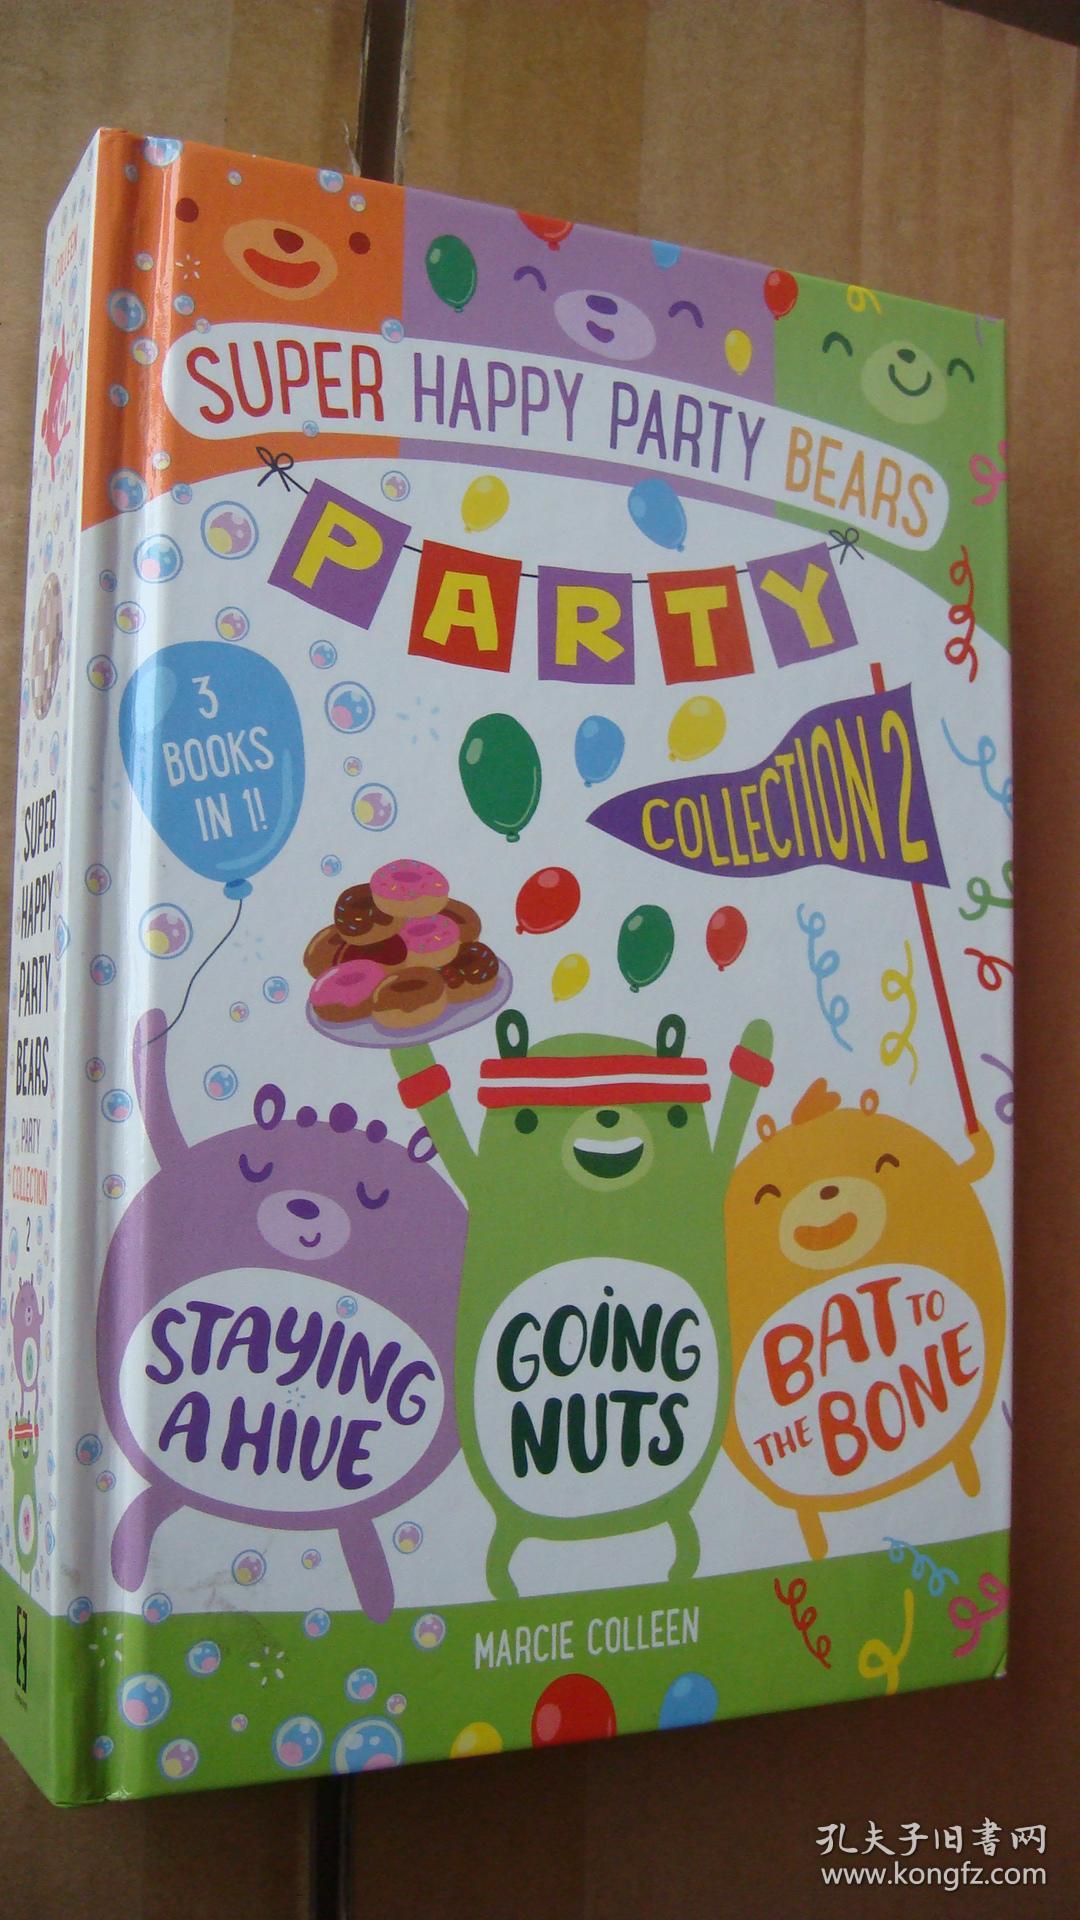 Super Happy Party Bears: Party Collection (Collection 2)  精装大32开 彩色插图本 全铜版纸 较重